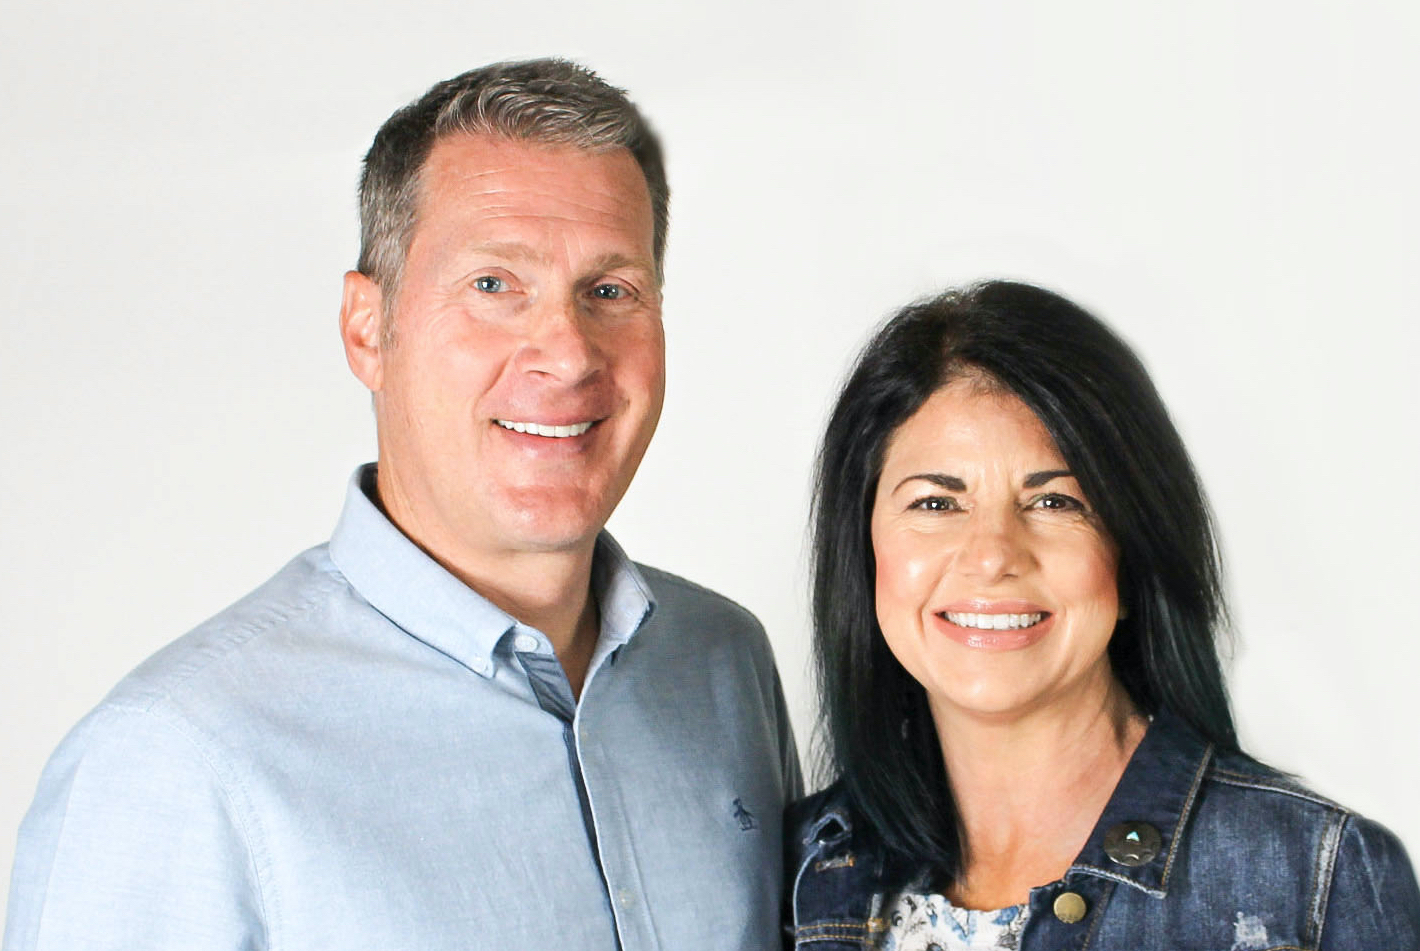 Kingdom Winds and Kingdom Winds Publishing Co-Founders, Gary and Elizabeth Suess